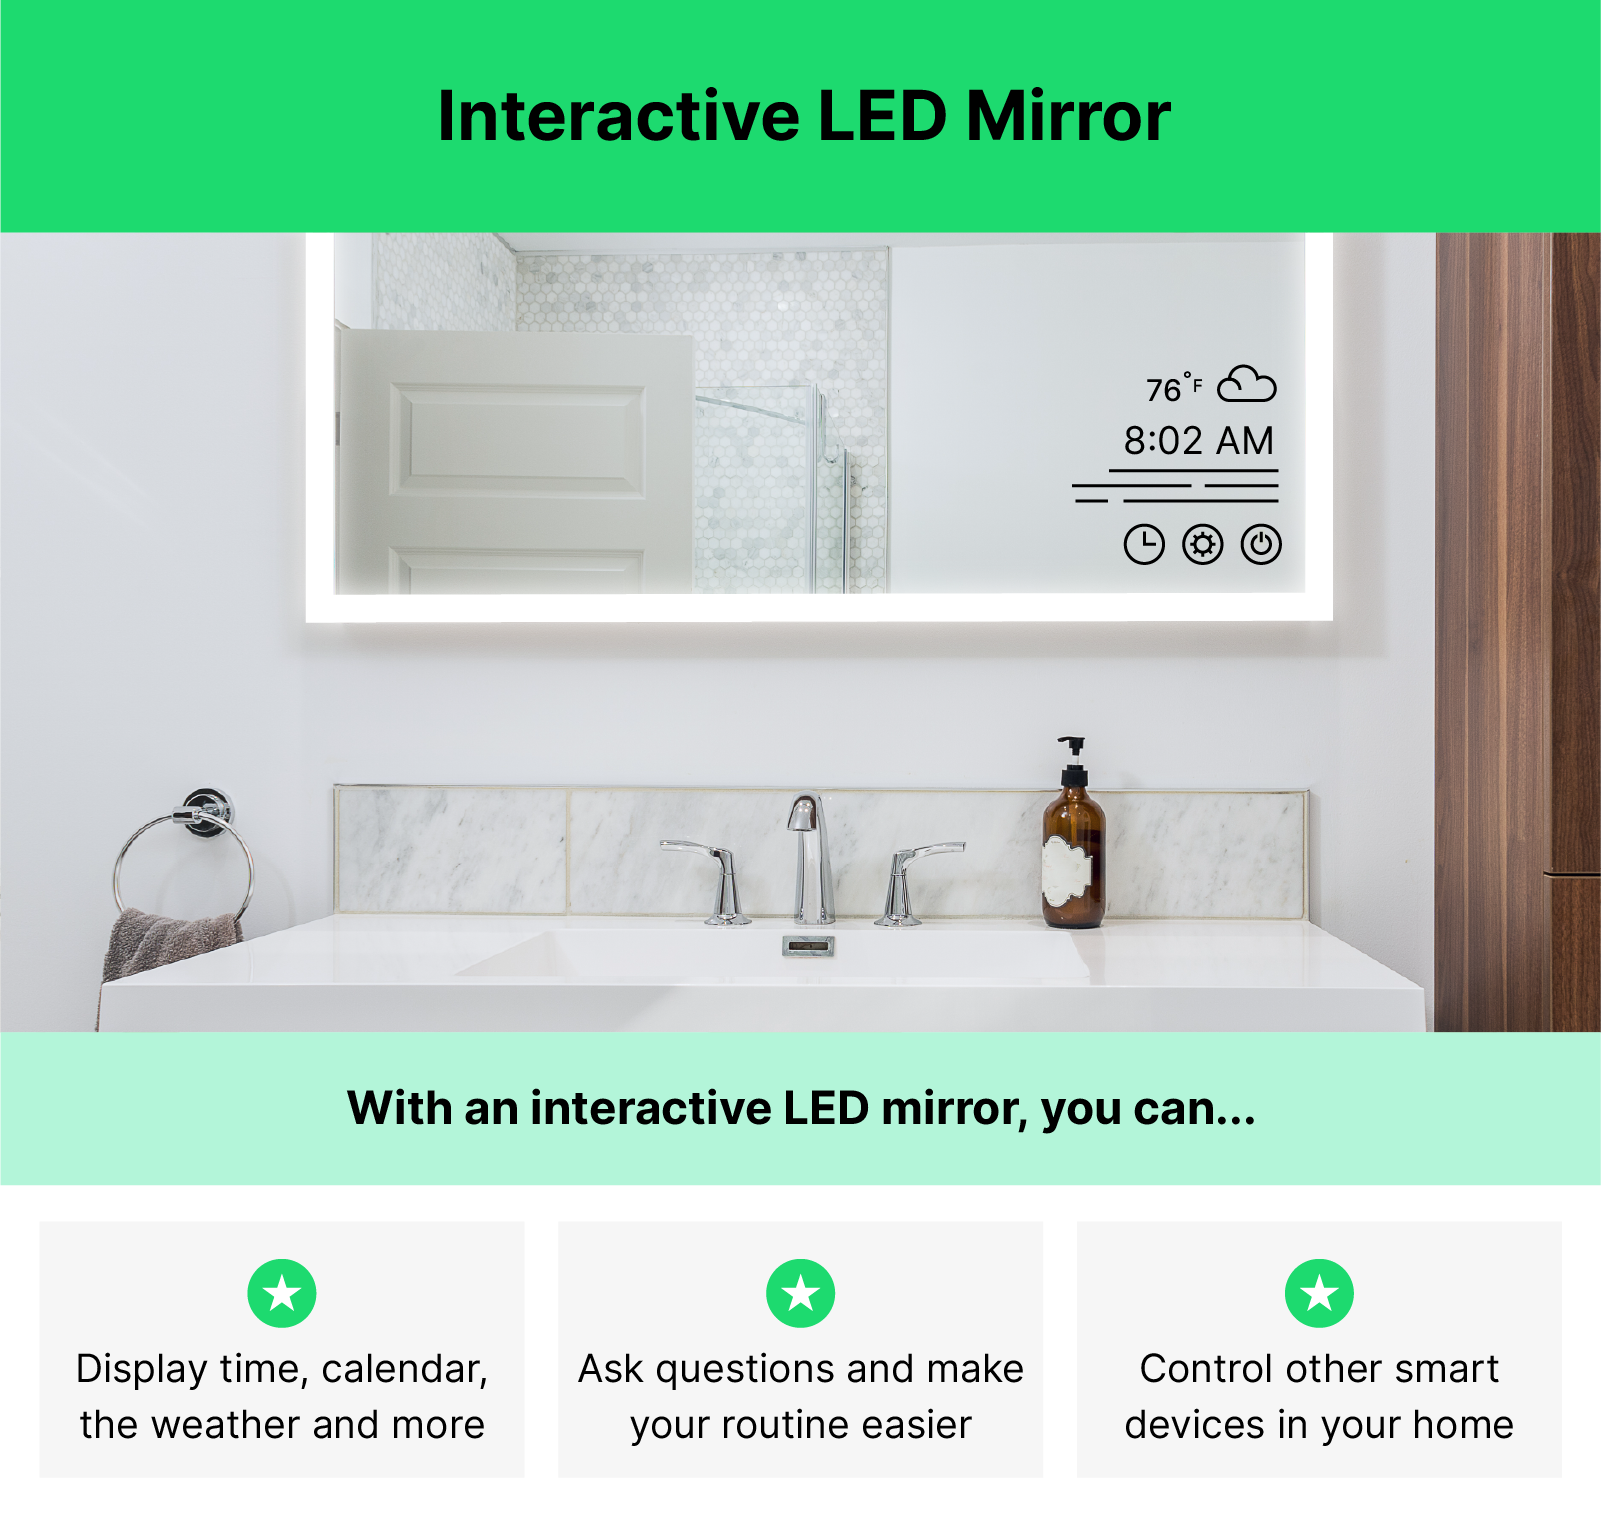 Image of a mirror with illustrated interactivity on it with text below